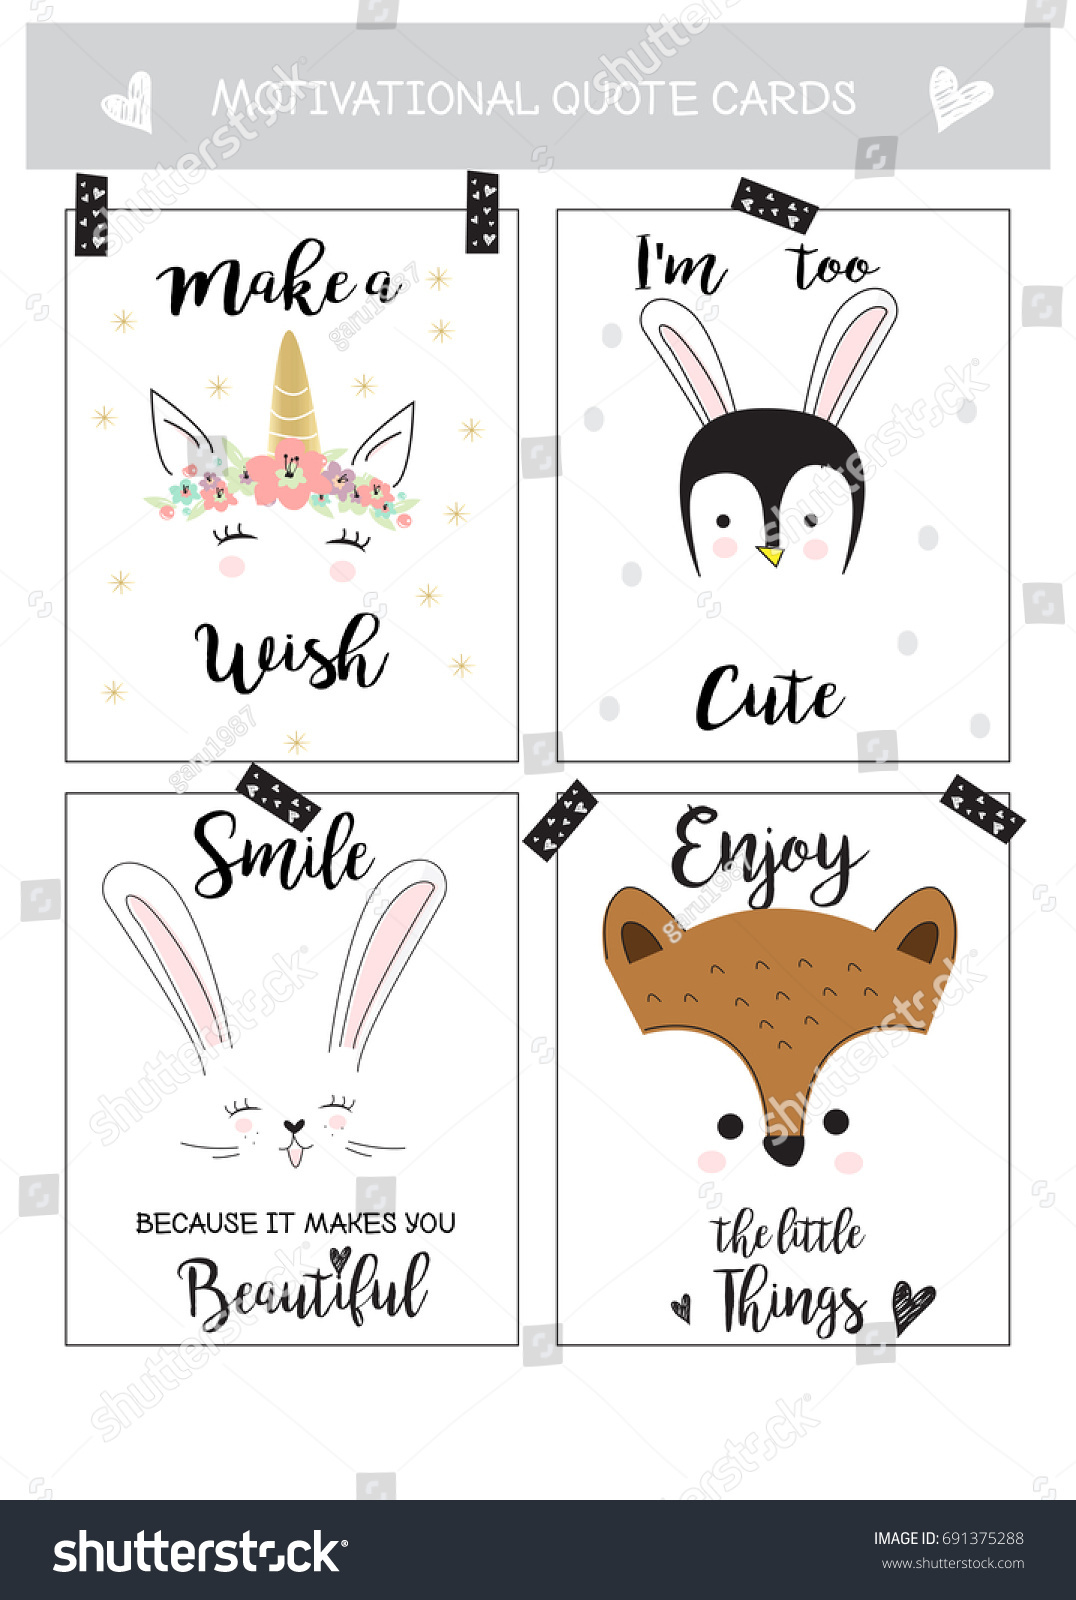 Cute Animal Cards Motivational Quotes Vector Stock Vector Royalty